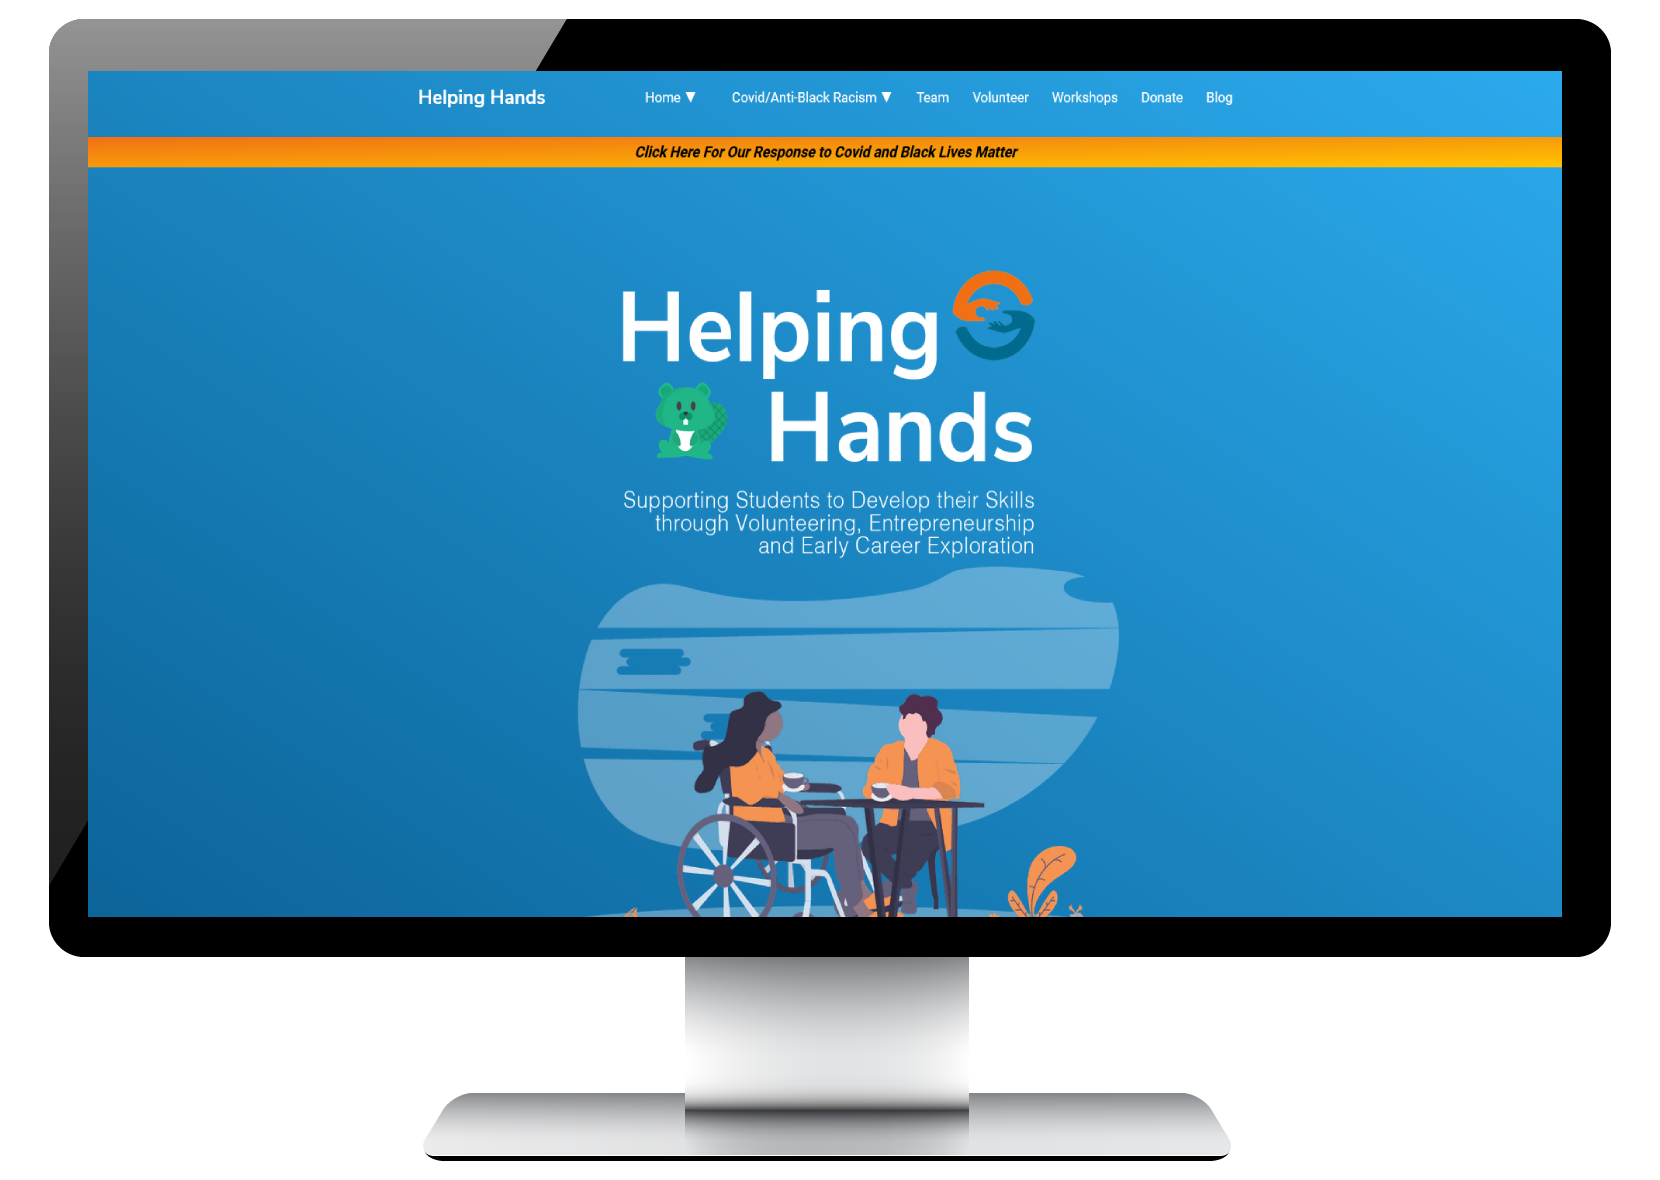 A desktop view of the helping hands landing page.